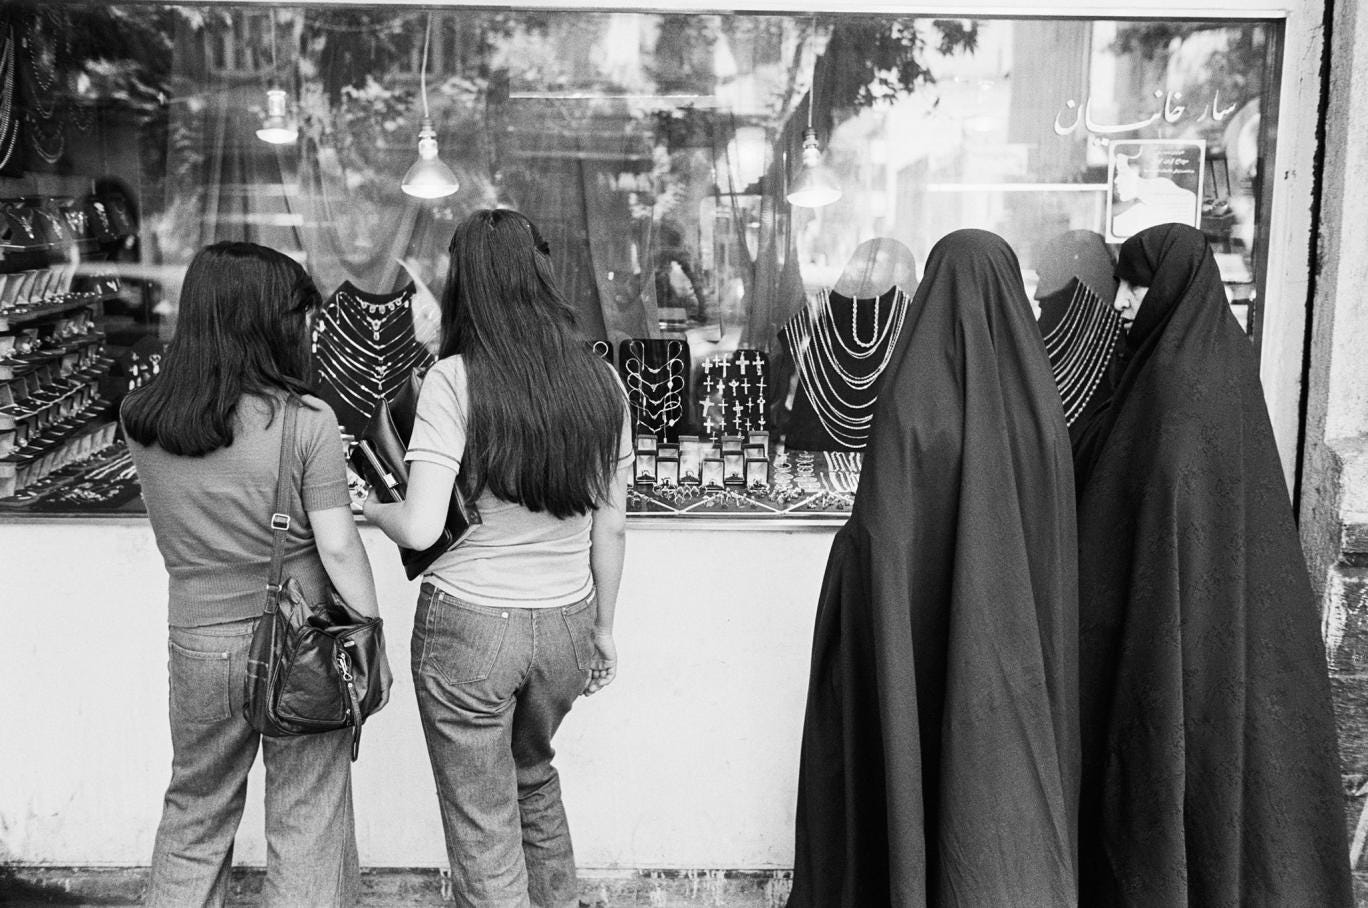 Women in traditional and western clothing stand side by side as they look at a shop window in Iran